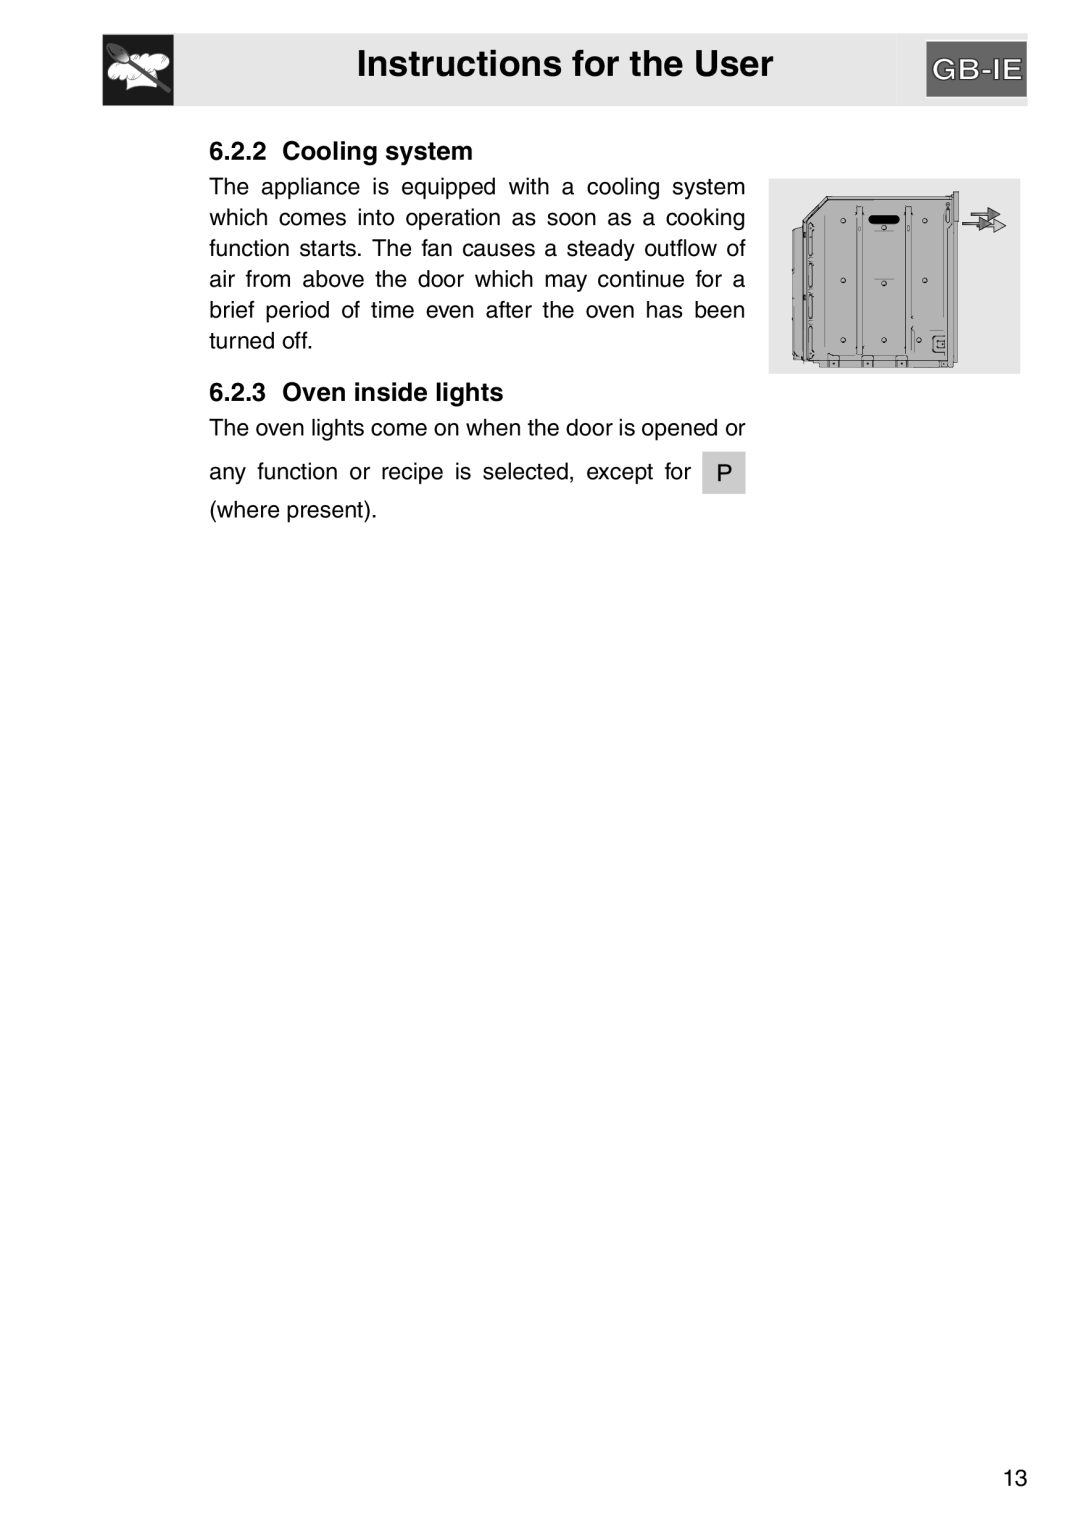 Smeg electric oven, SAP306X-9 installation instructions Cooling system, Oven inside lights, Instructions for the User 